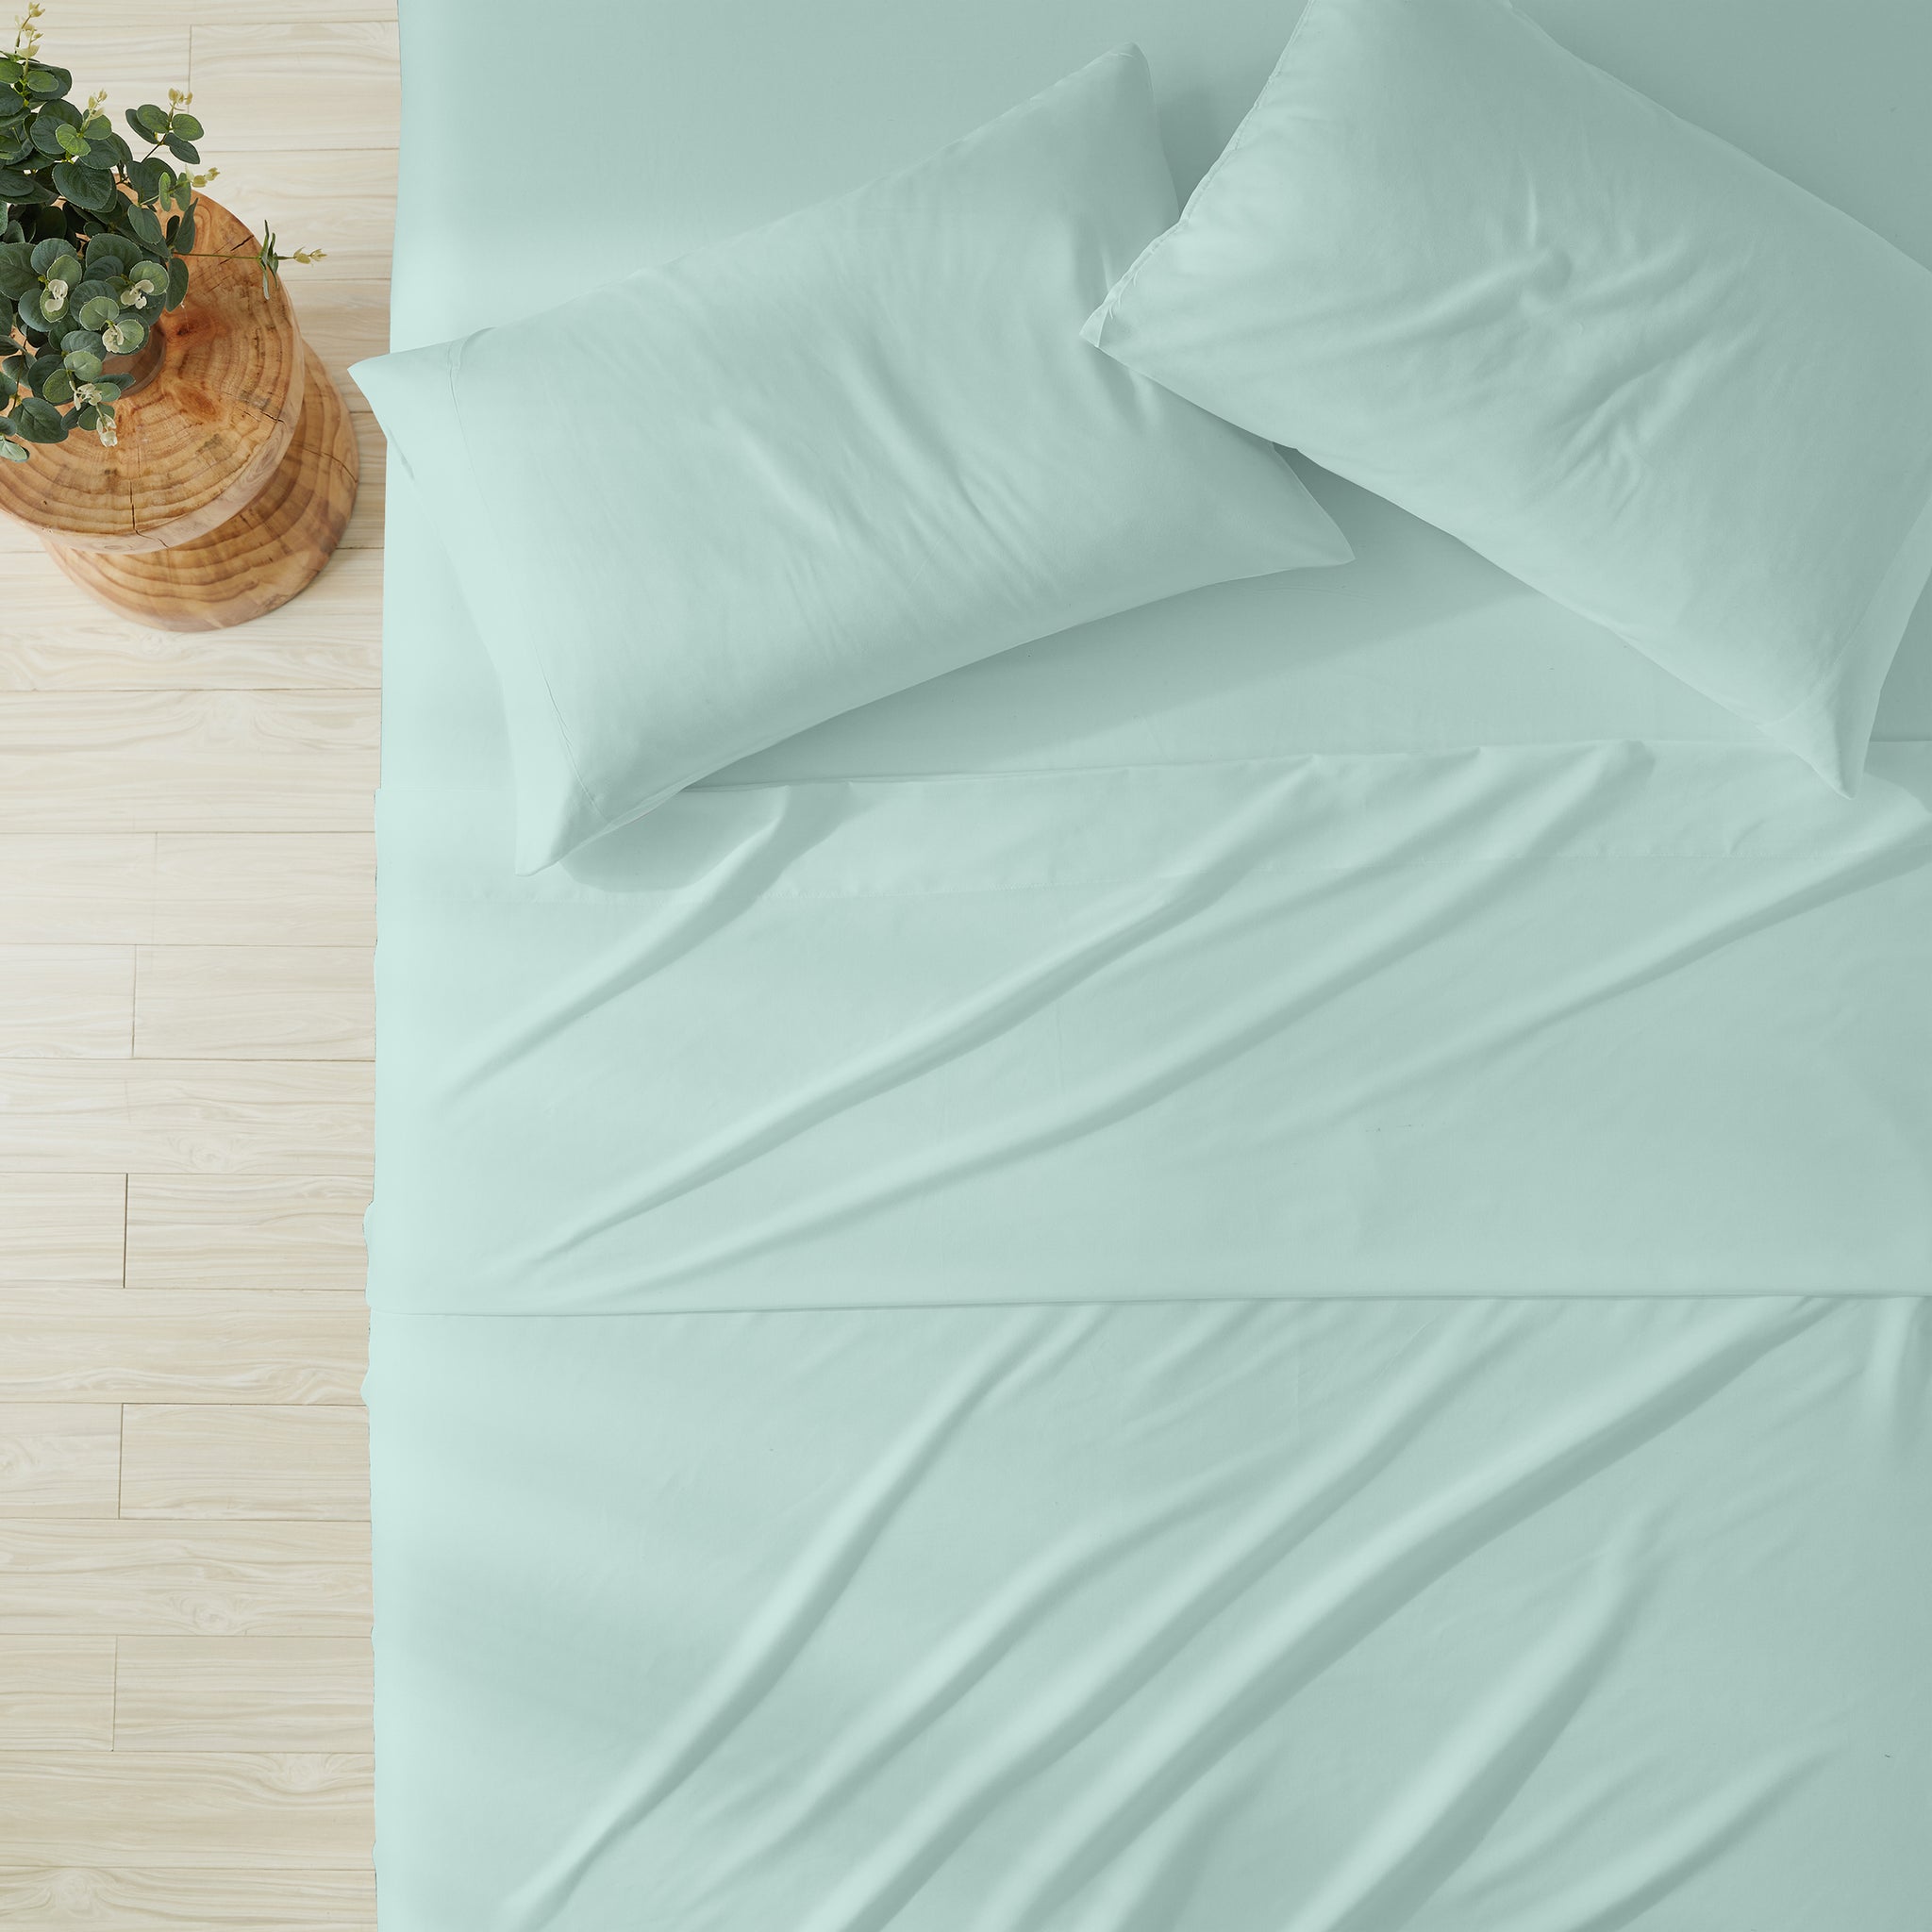 Antimicrobial Bed Sheets - Silver Ion Technology - Miracle Brand 